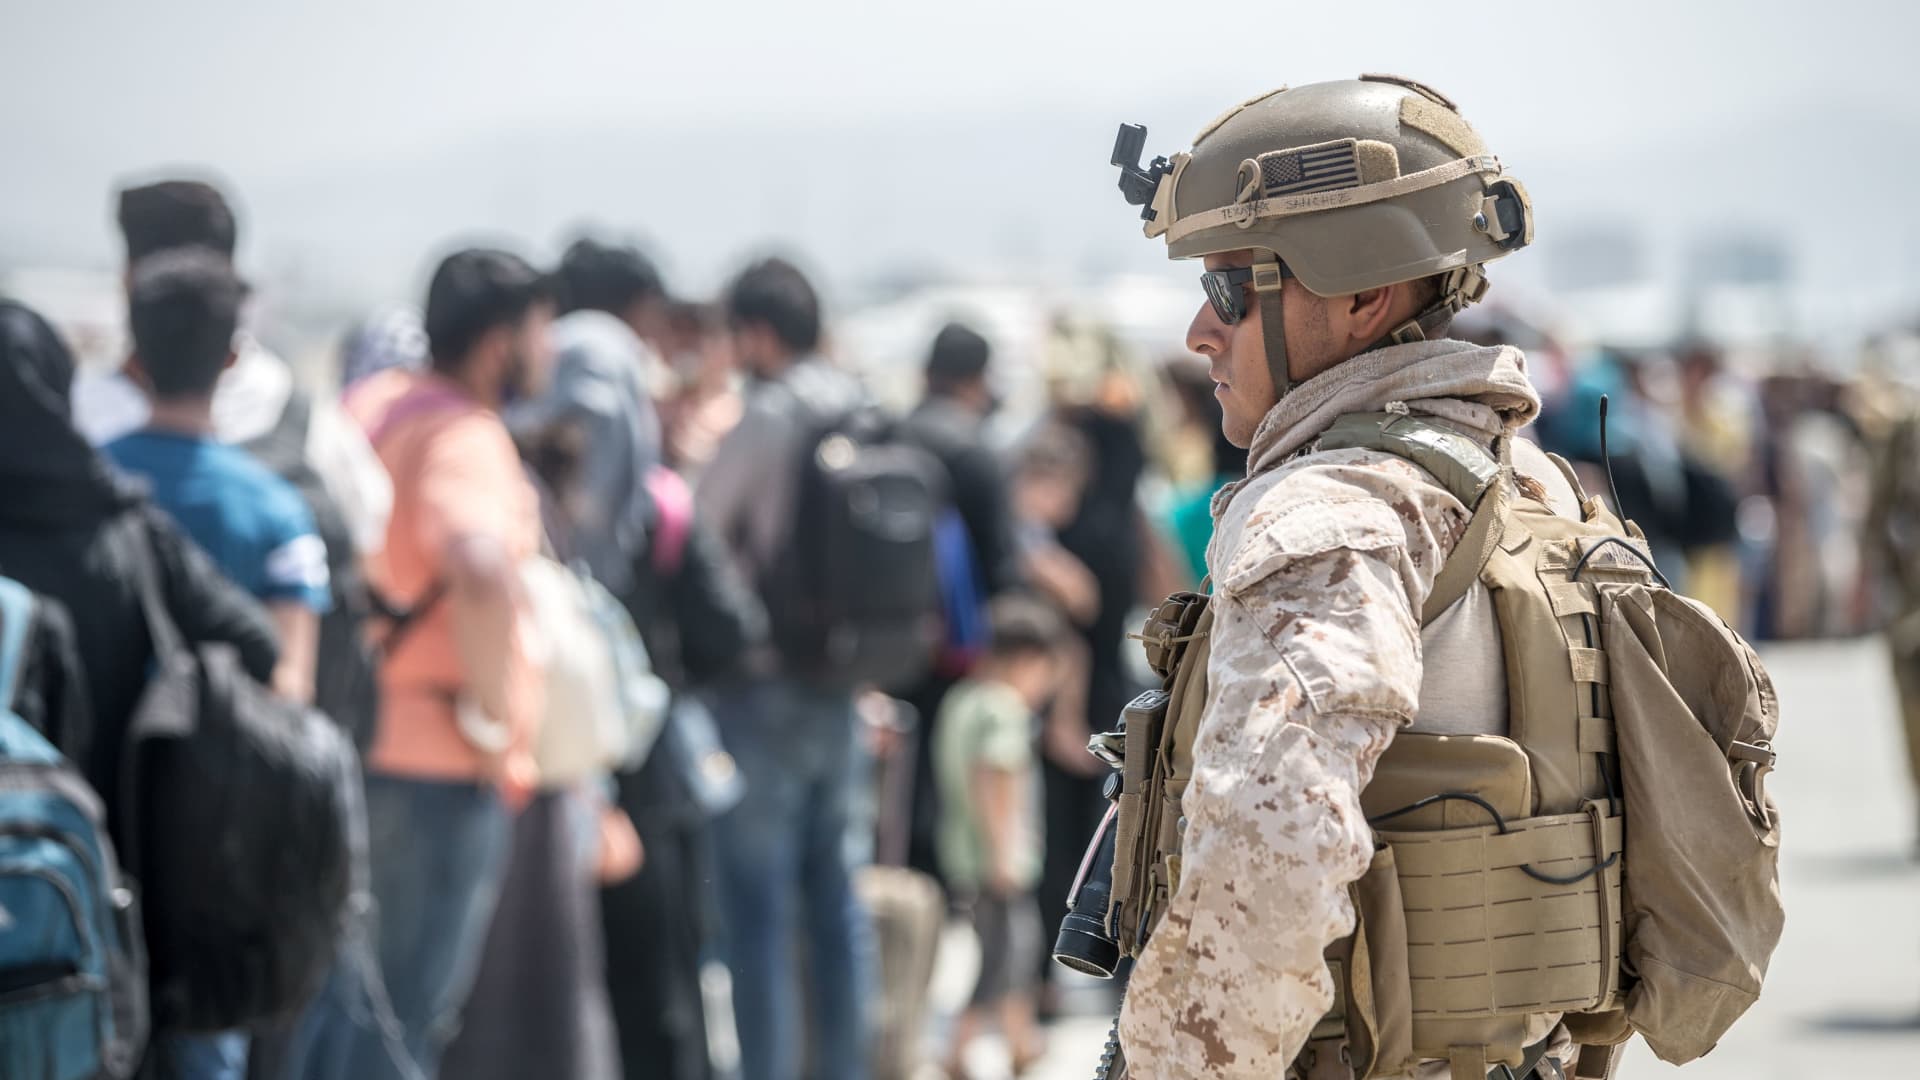 A U.S. Marine provides assistance during an evacuation at Hamid Karzai International Airport, Afghanistan, August 22, 2021.